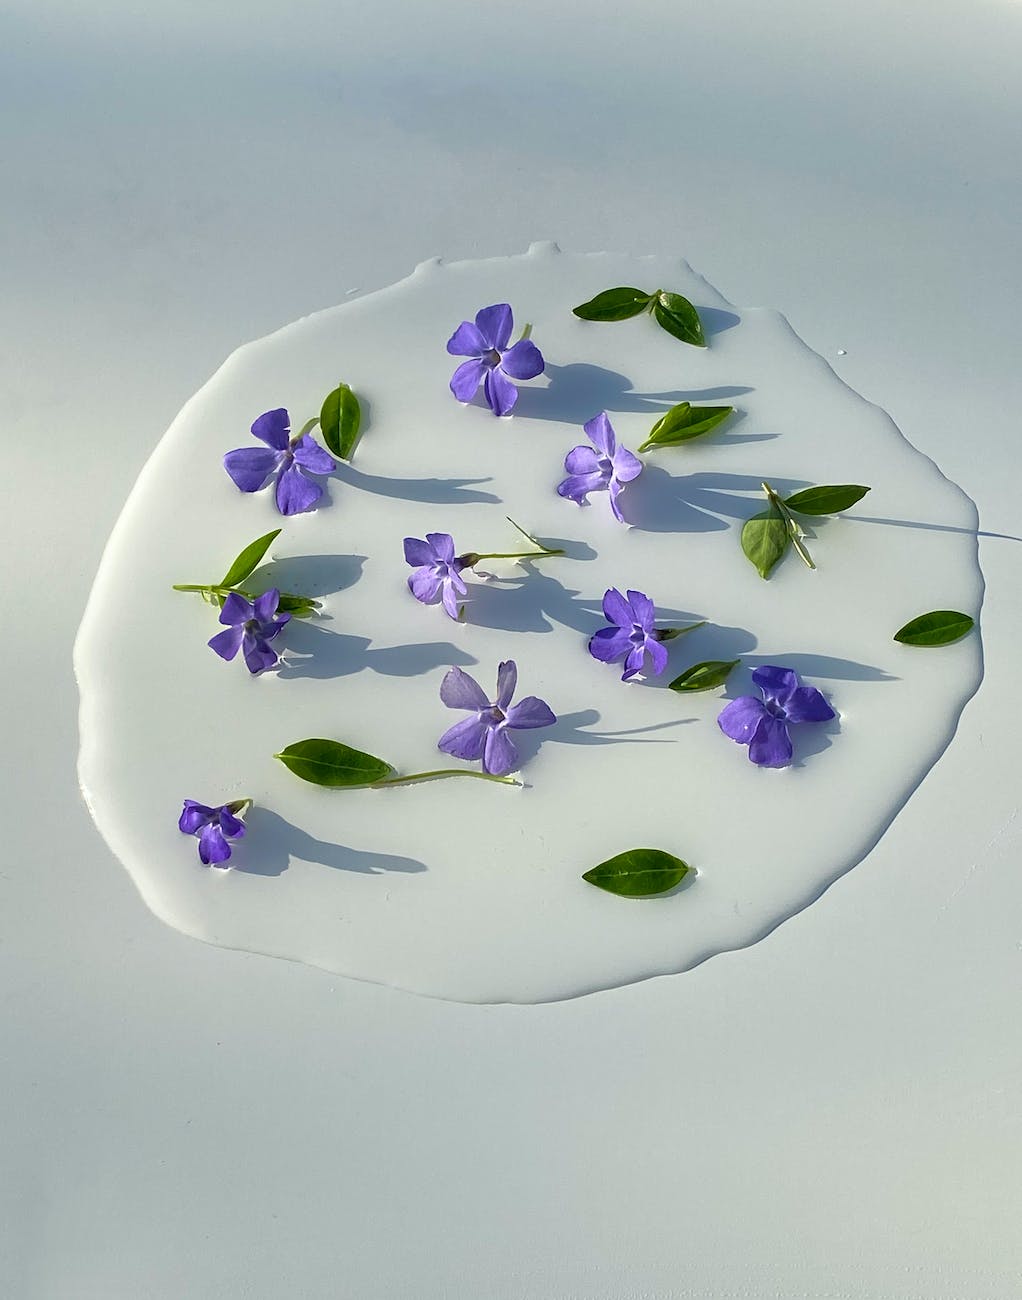 spilled milk decorated with flowers with leaves on table